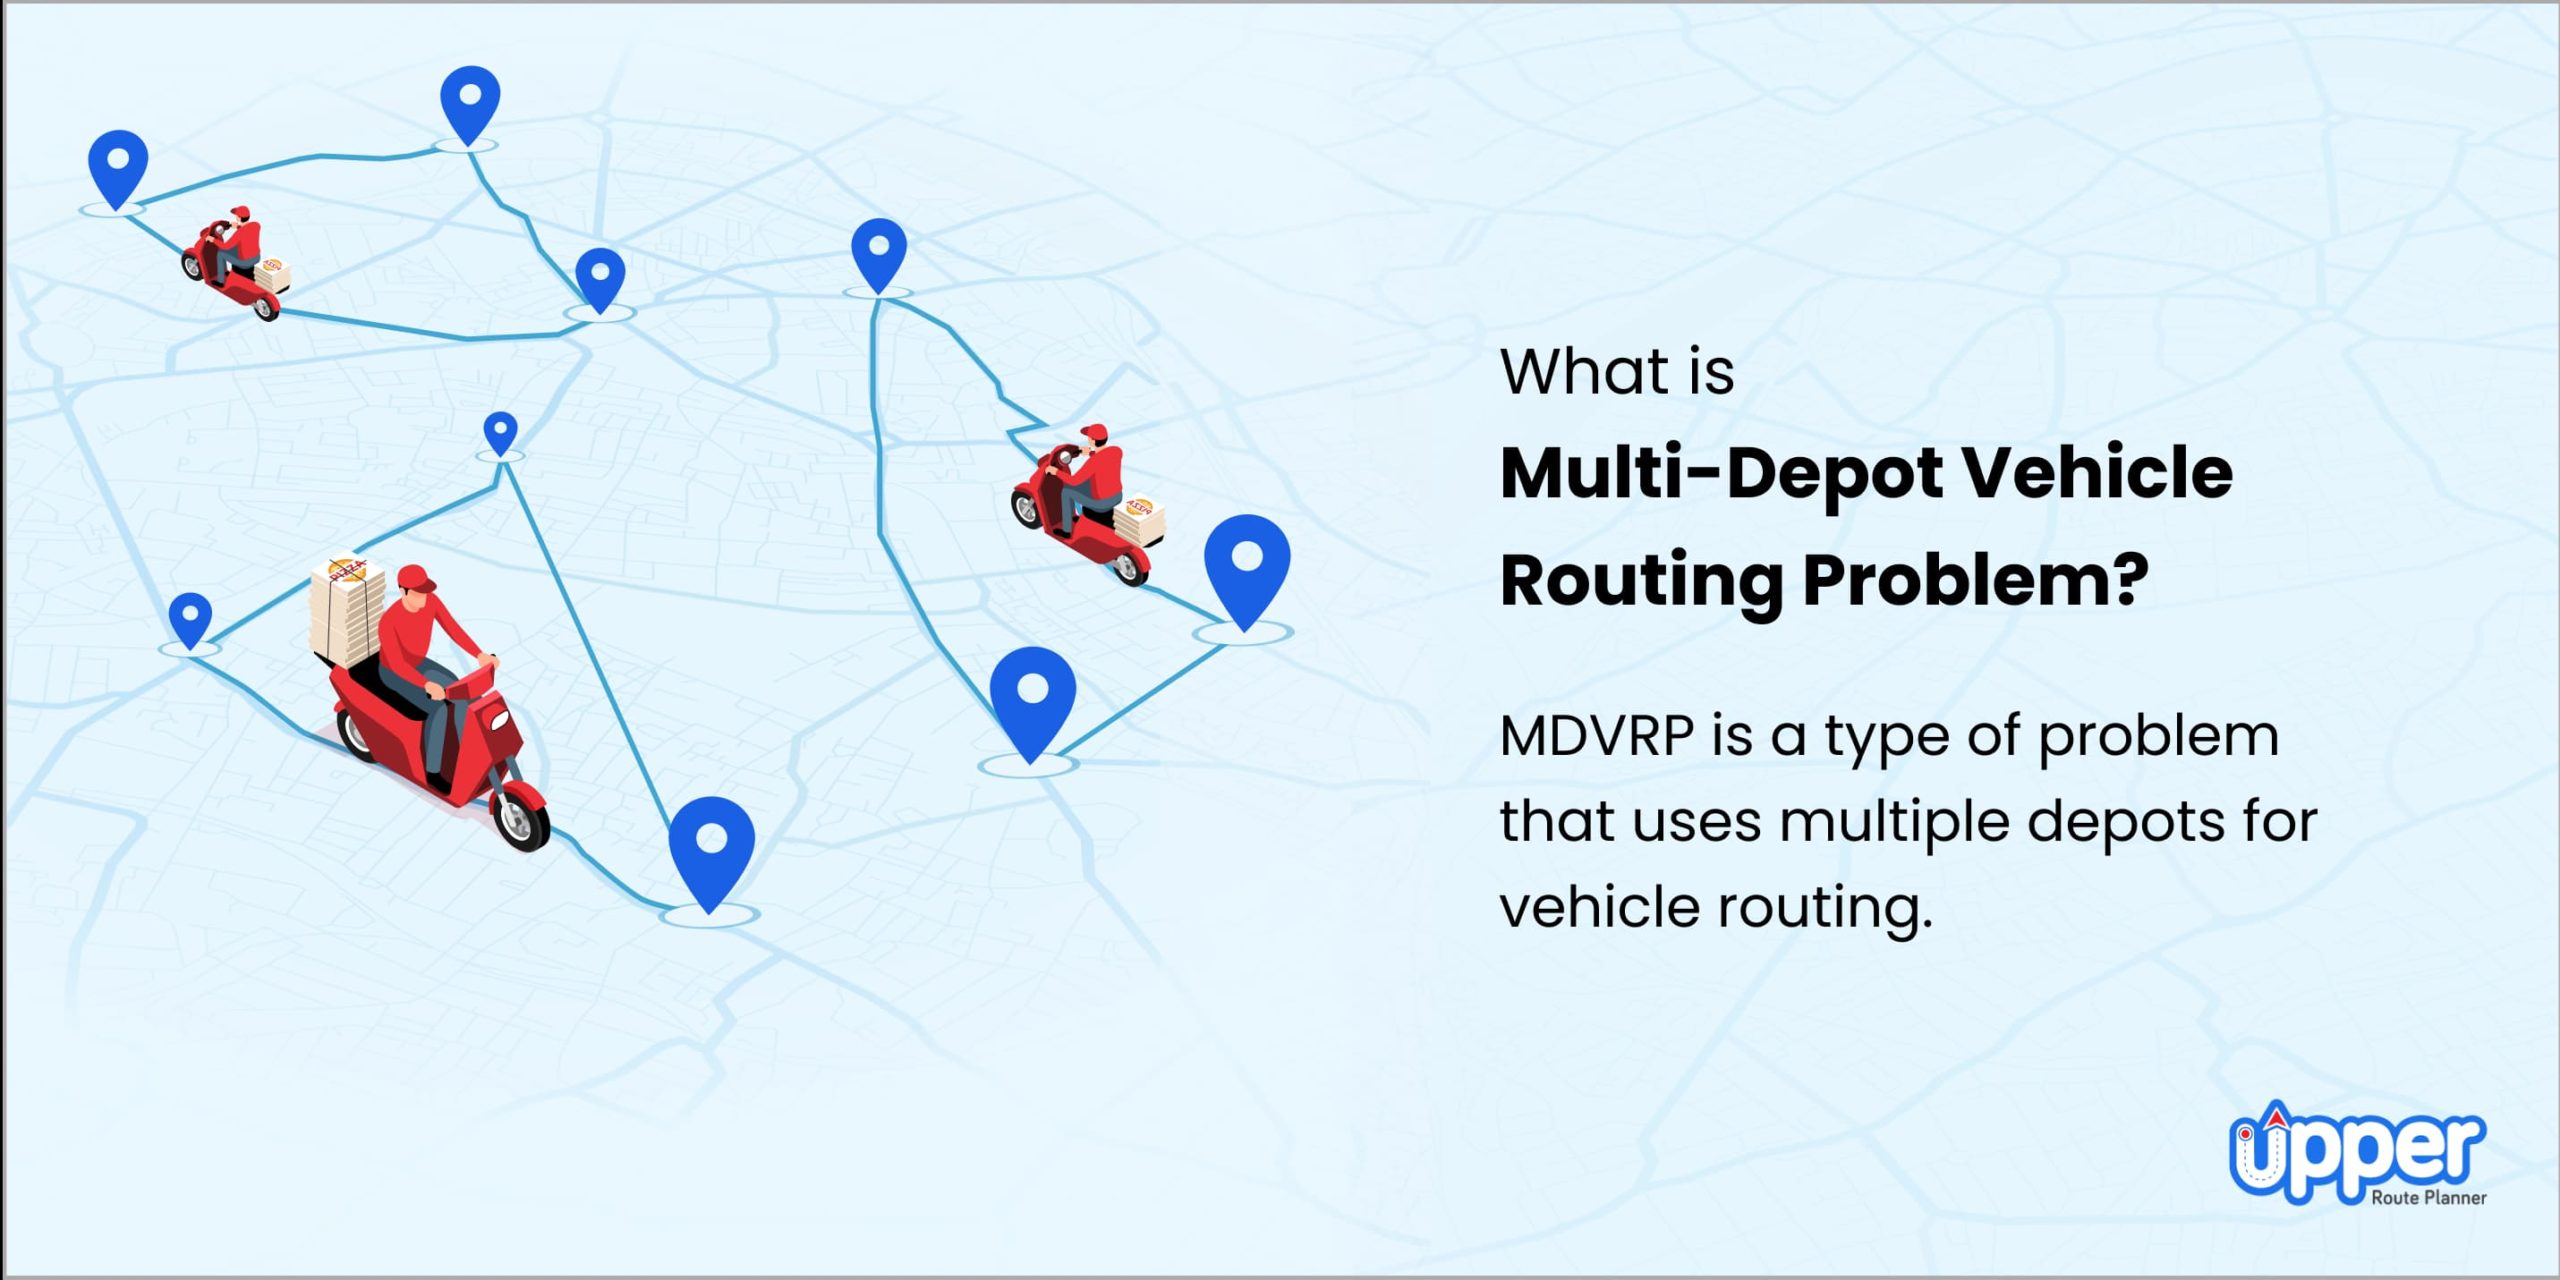 What is multi-depot vehicle routing problem